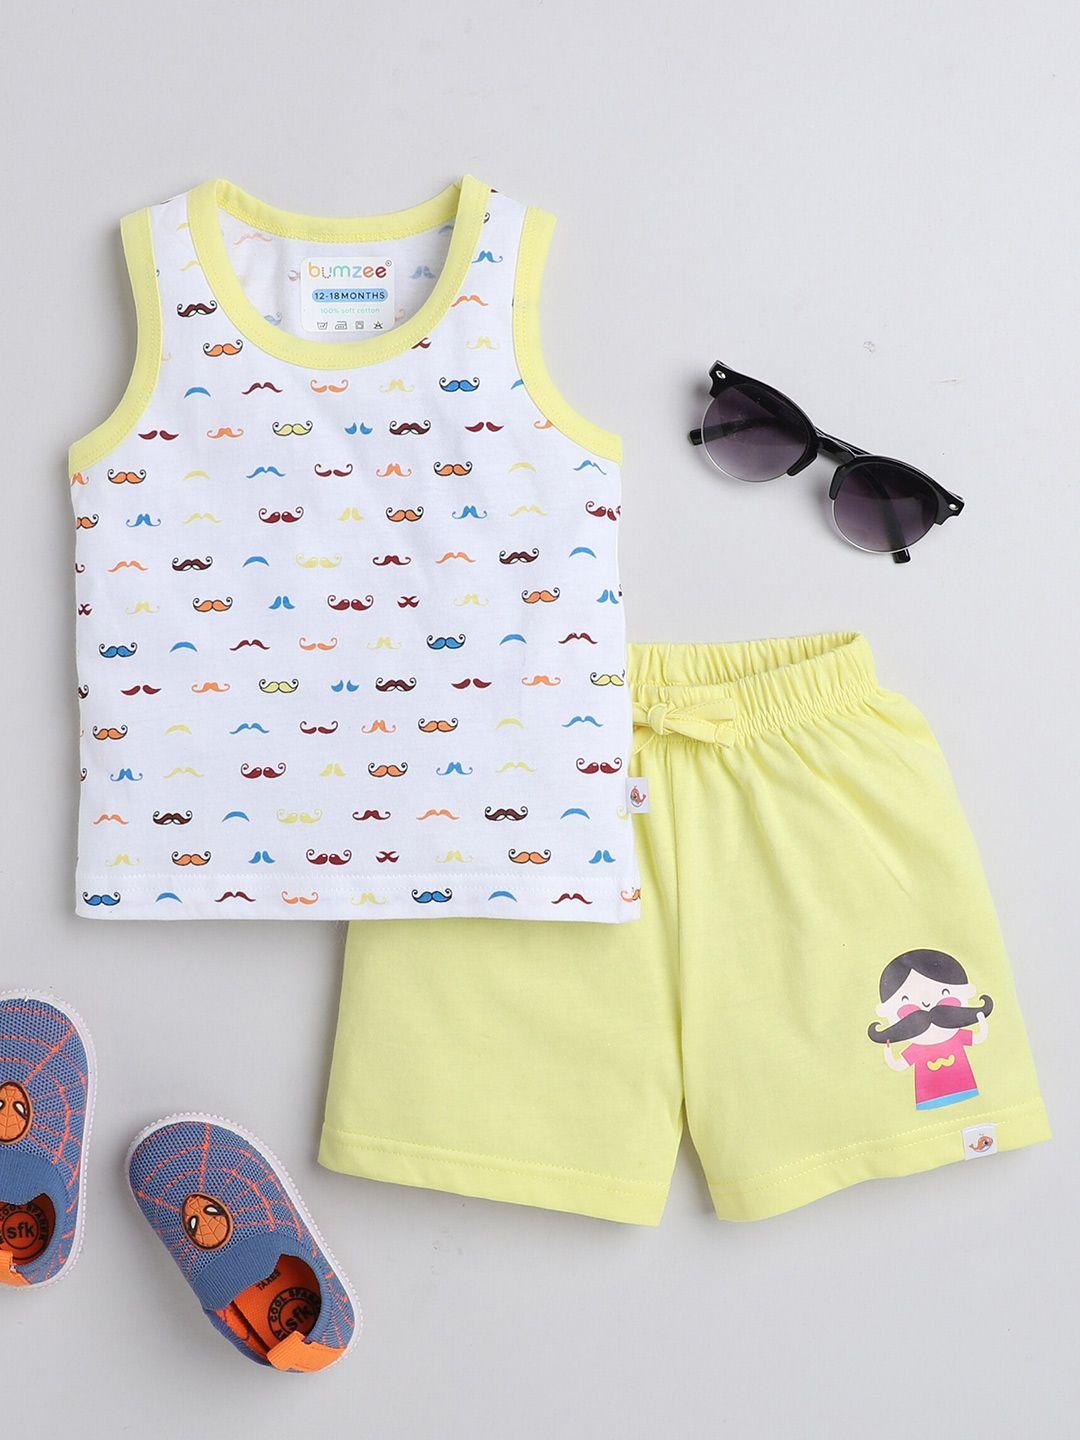 bumzee-boys-white-&-yellow-printed-t-shirt-with-shorts